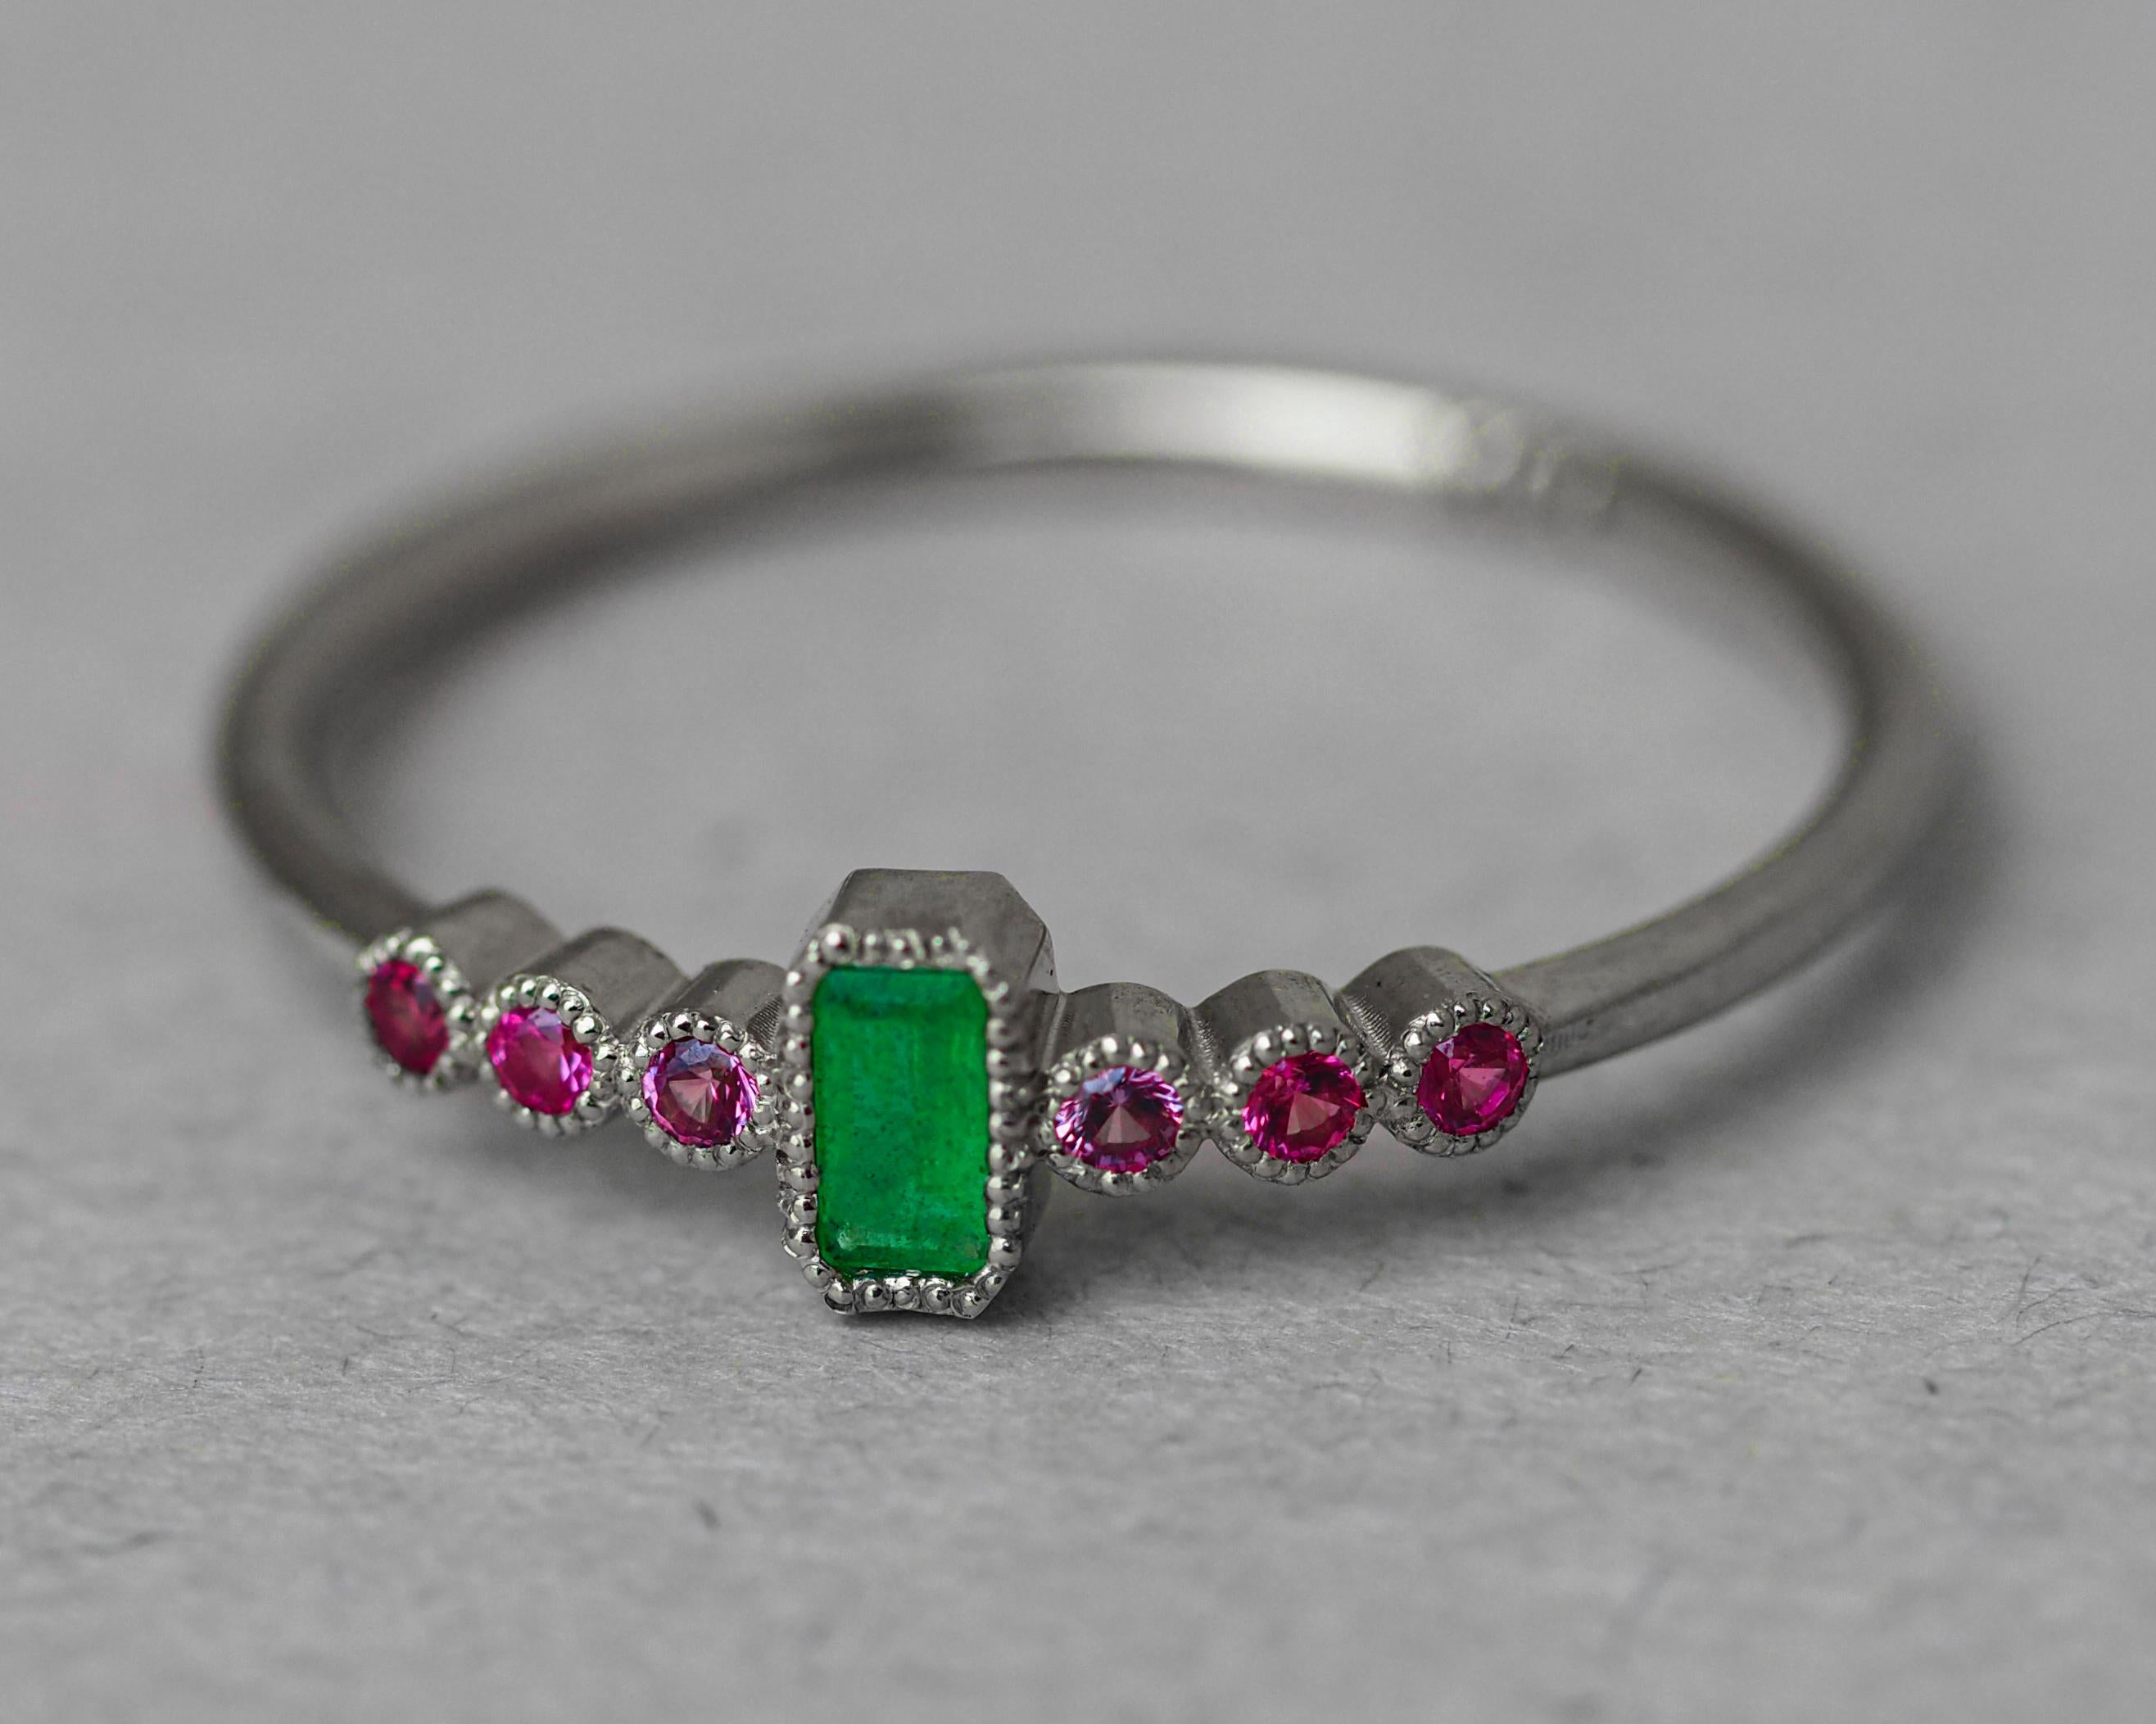 For Sale:  Baguette Cut Emerald and Sapphires 14k gold ring! 4